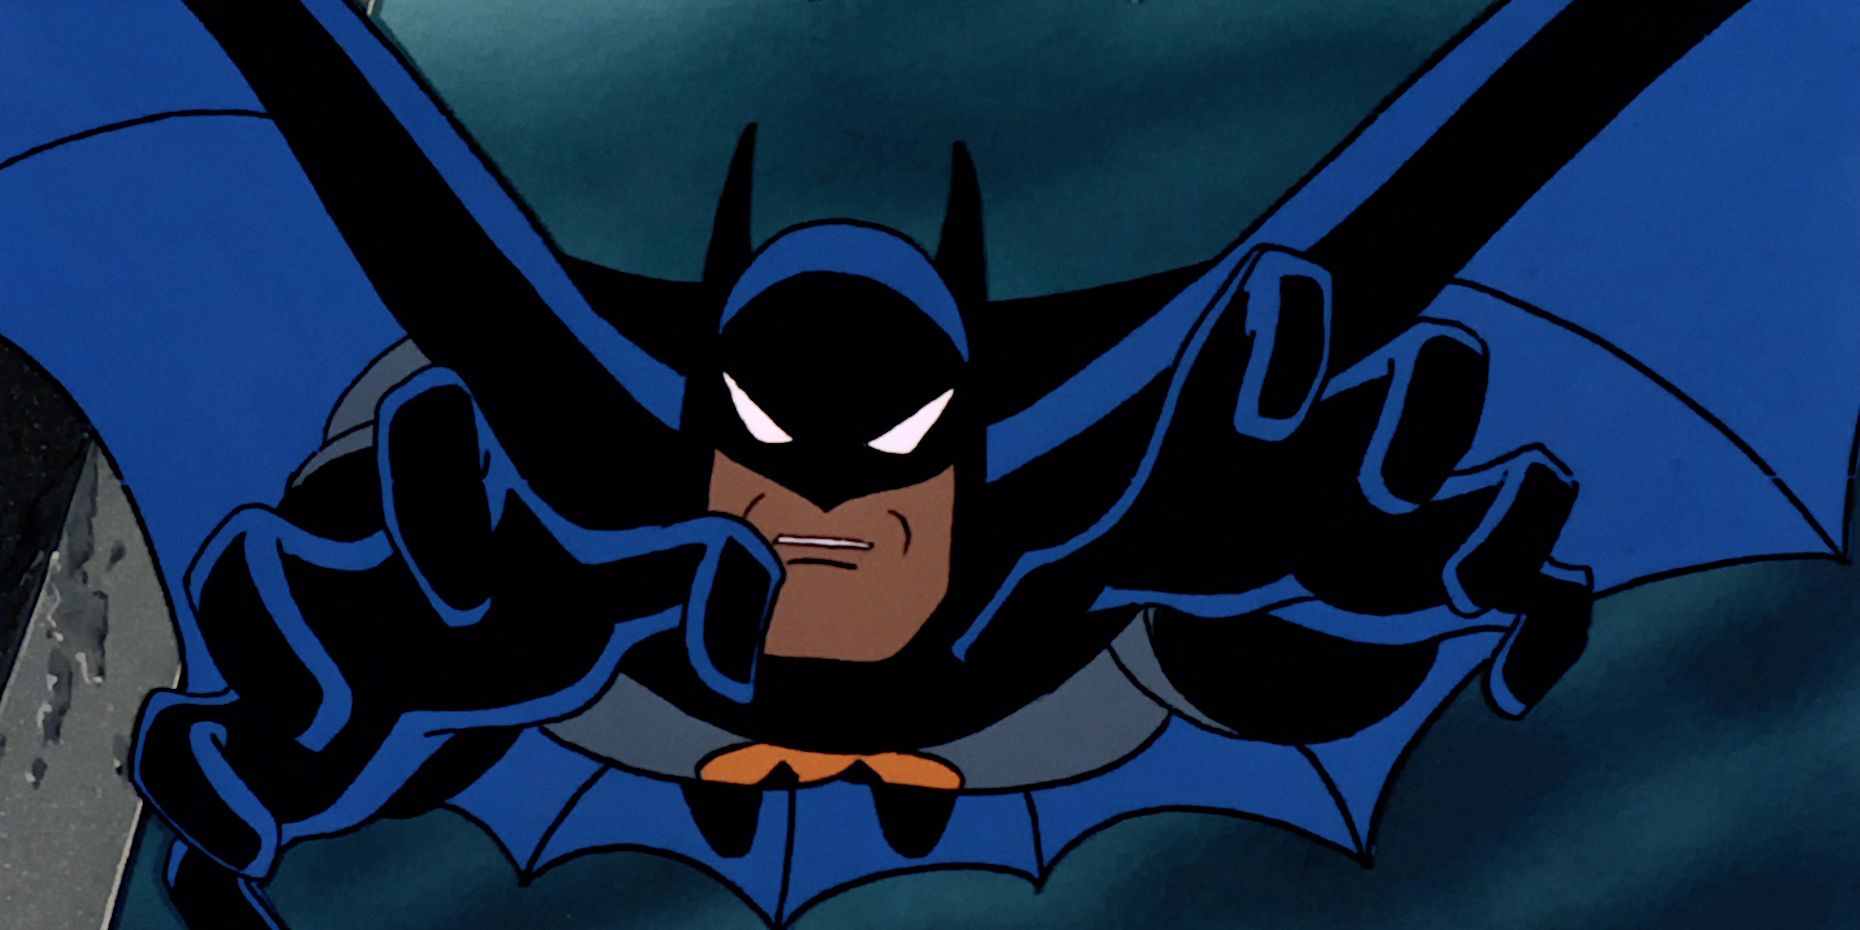 10 Best Episodes Of Batman The Animated Series According To IMDb